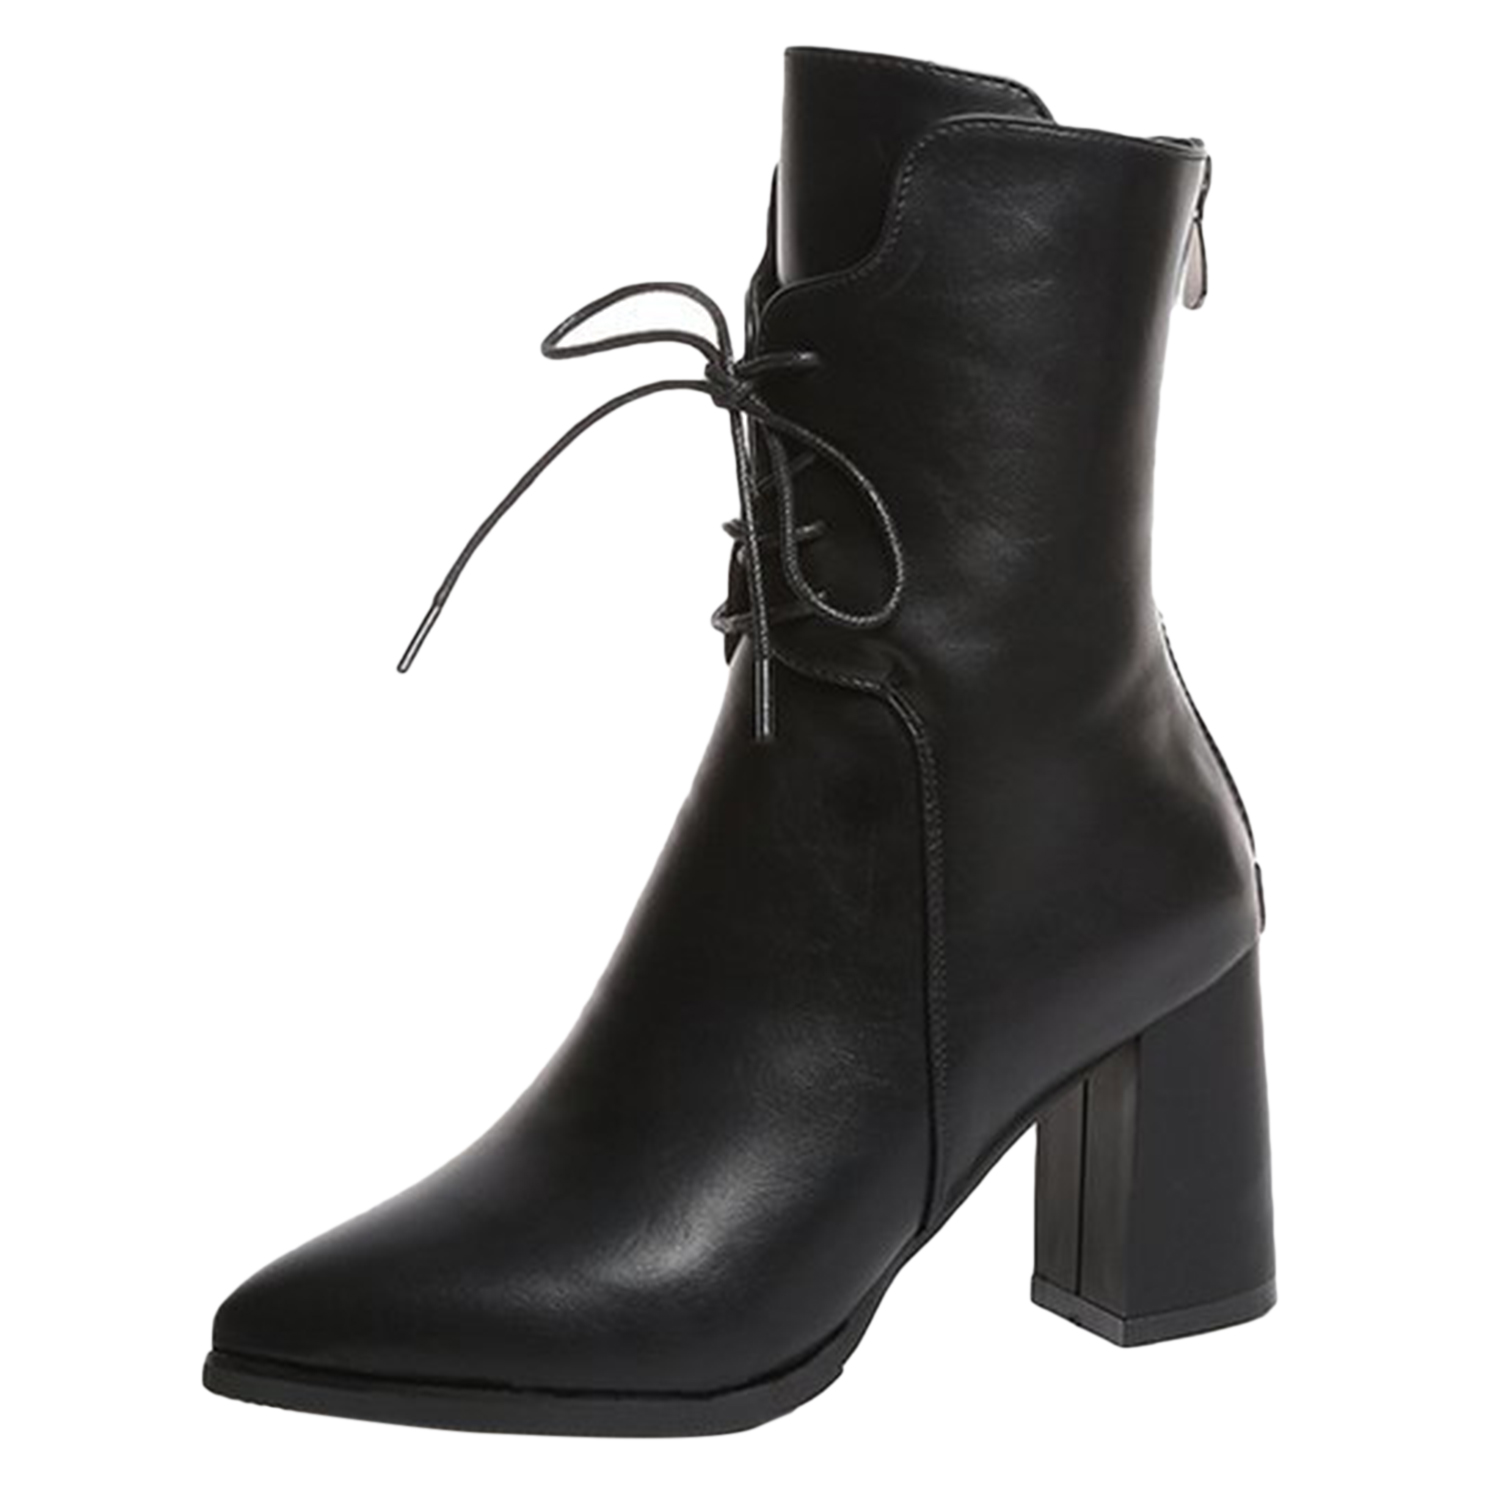 Solid Block Heels Lace up Pointed Toe Mid-calf Boots - STYLESIMO.com